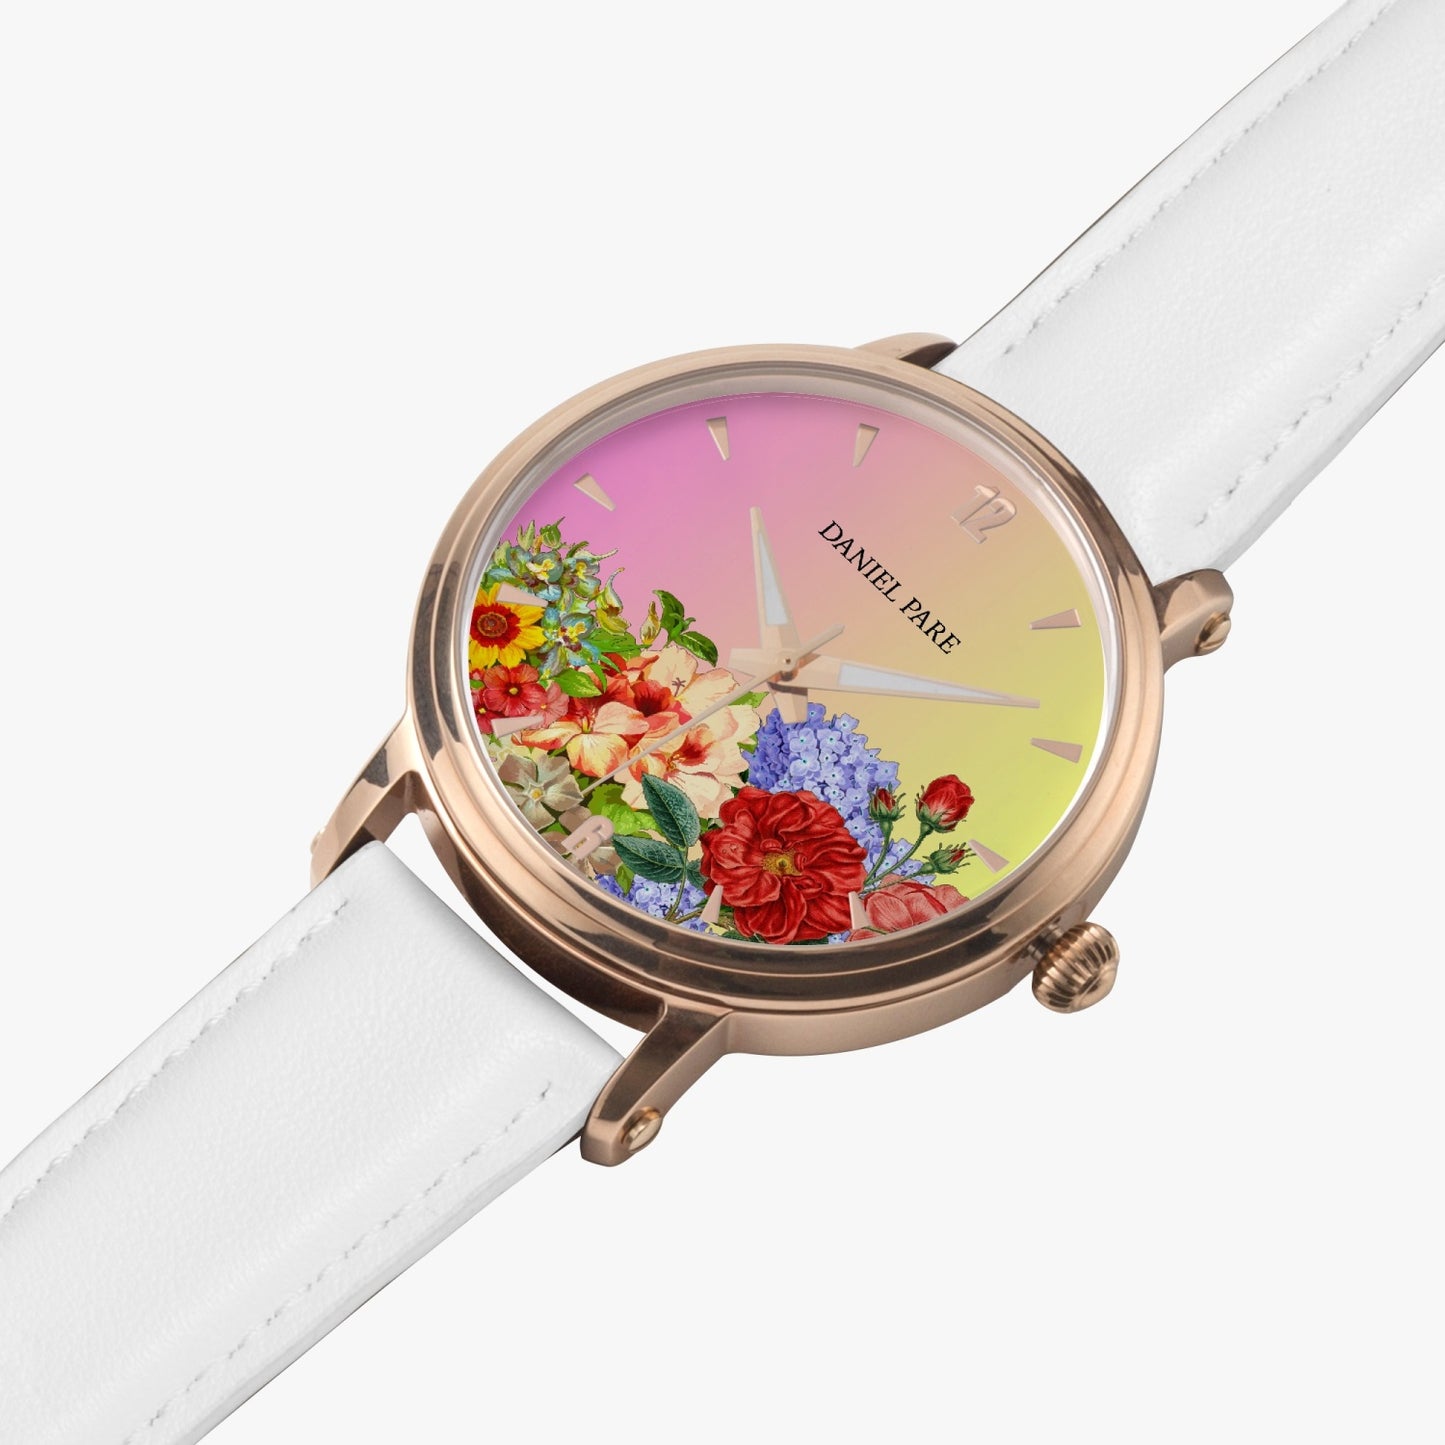 Midsummer Automatic 46mm Display Back Leather Strap Watch For Her